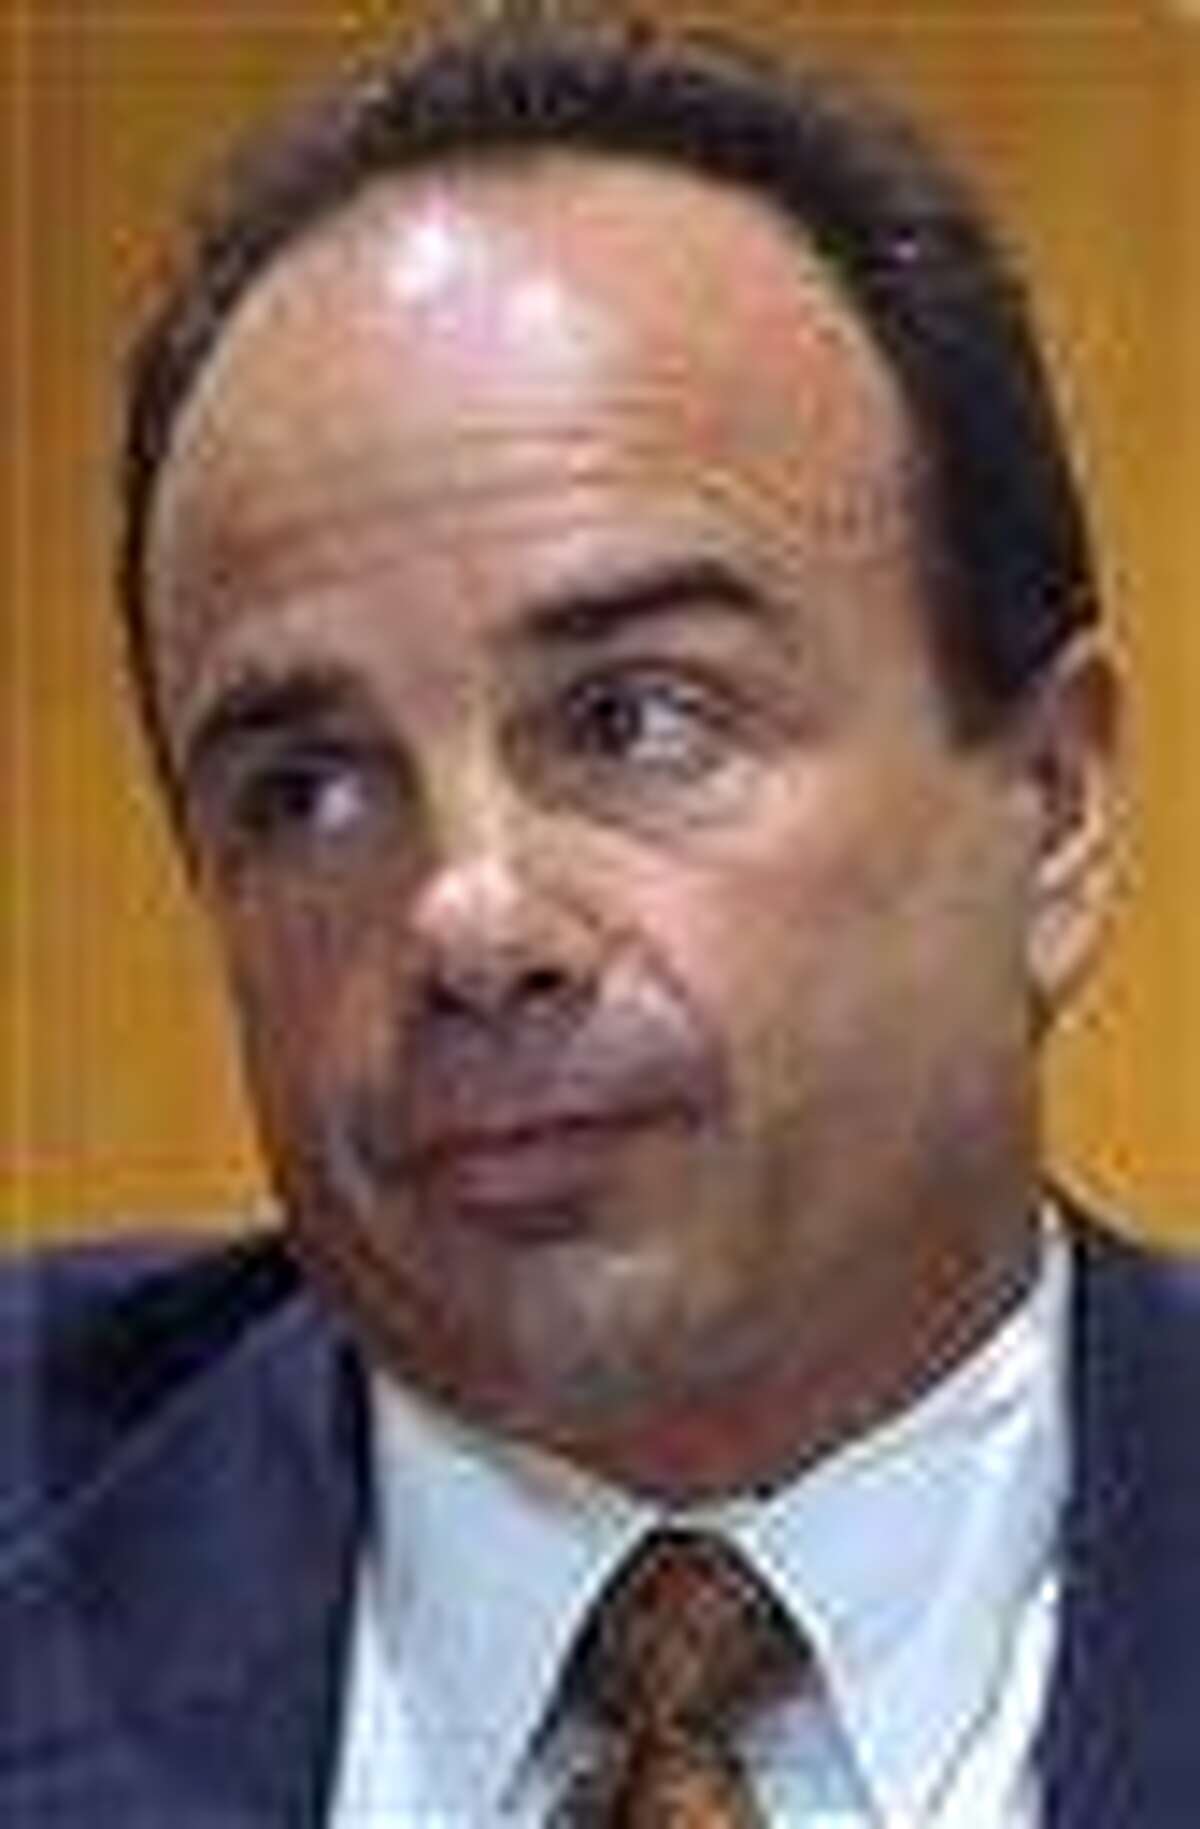 In this Sept. 11, 2012, photo, former Bridgeport Mayor Joseph Ganim appears before a three-judge panel in Superior Court, Bridgeport, Conn., in an effort to regain his law license. The panel rejected his request on Thursday. Ganim was convicted in 2003 of federal corruption, and served seven years of a nine year sentence. (AP Photo/Connecticut Post, Ned Gerard, File)